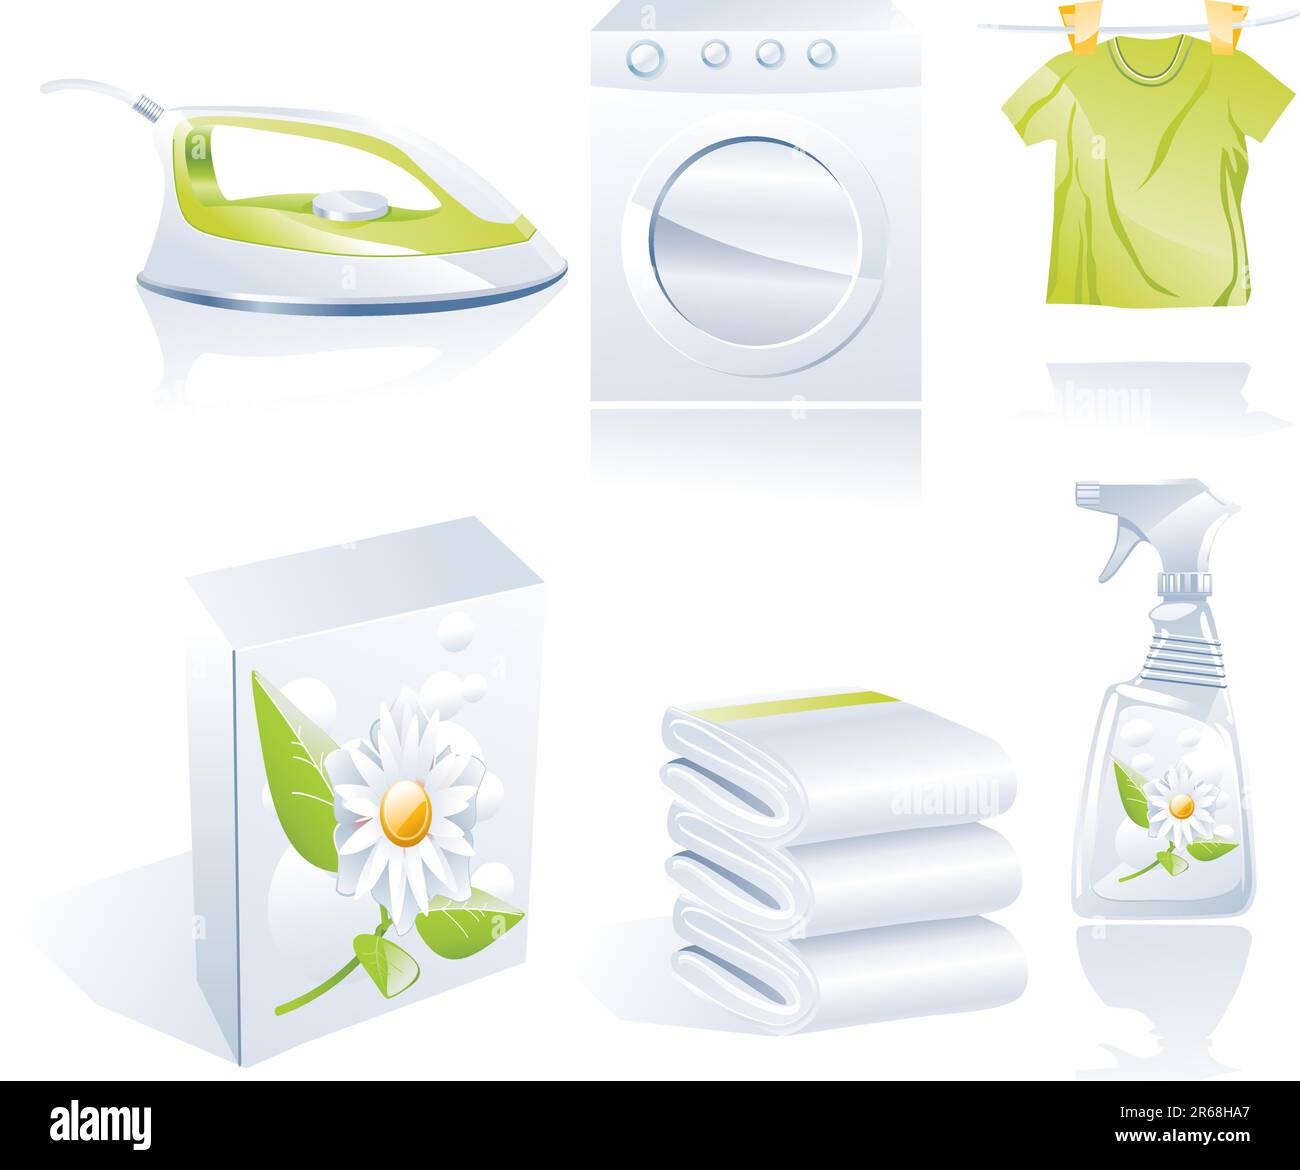 Laundry related icon set in blue and green Stock Vector